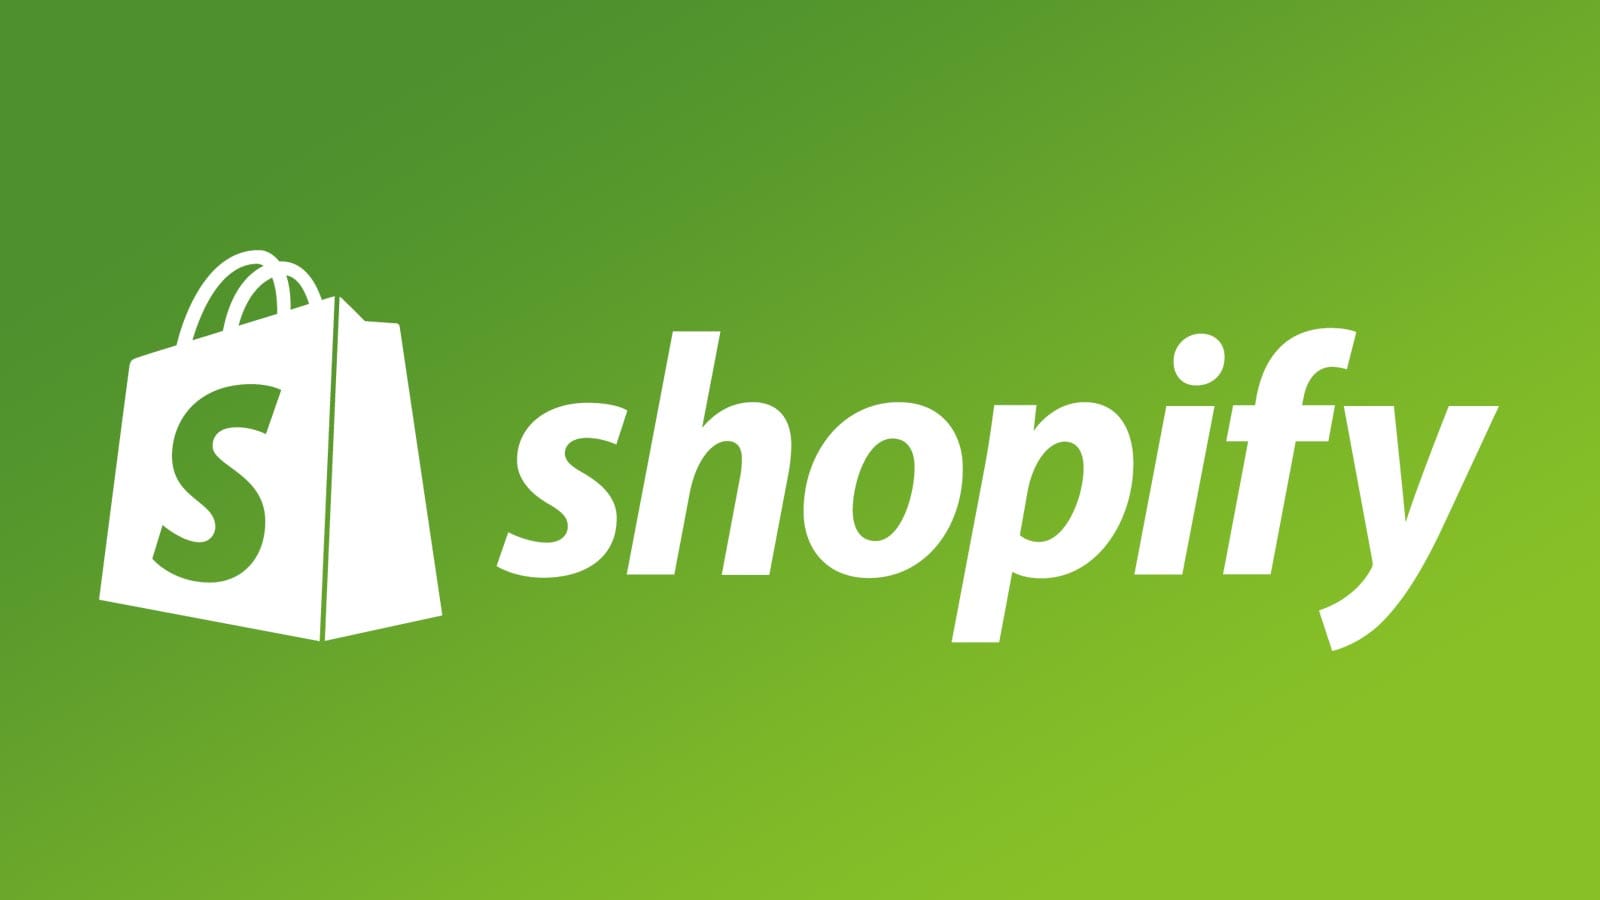 26 free shopify tools, & other ecommerce opportunities you didn't know about - moving traffic media